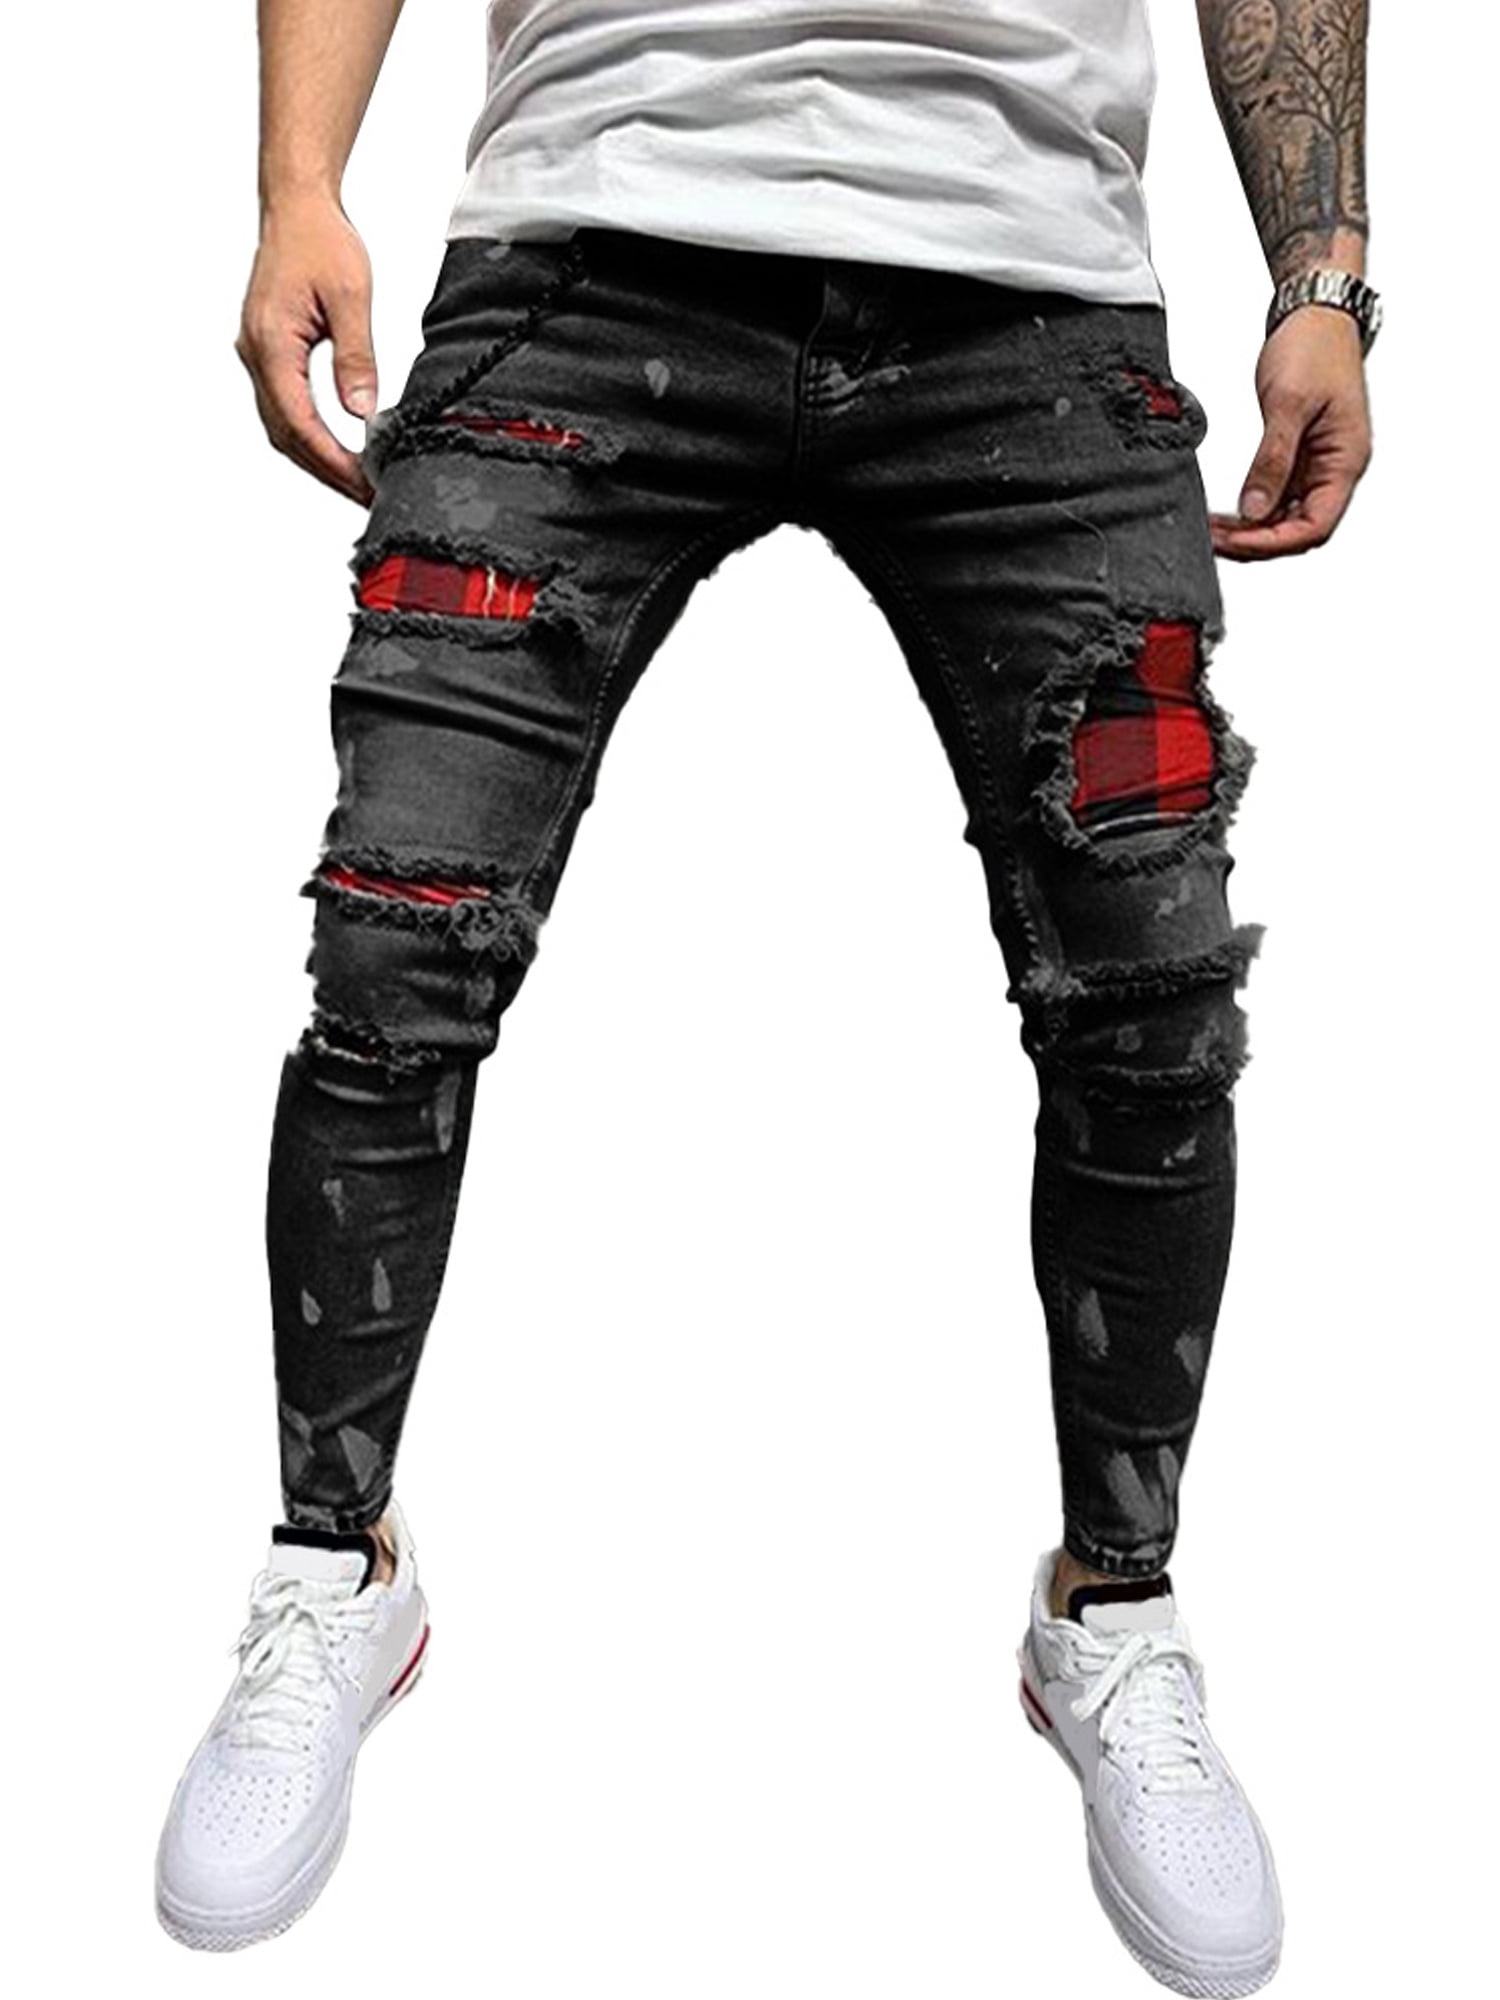 Mens Ripped Denim Skinny Biker Jeans Stretch Trousers Distressed Casual Pants 